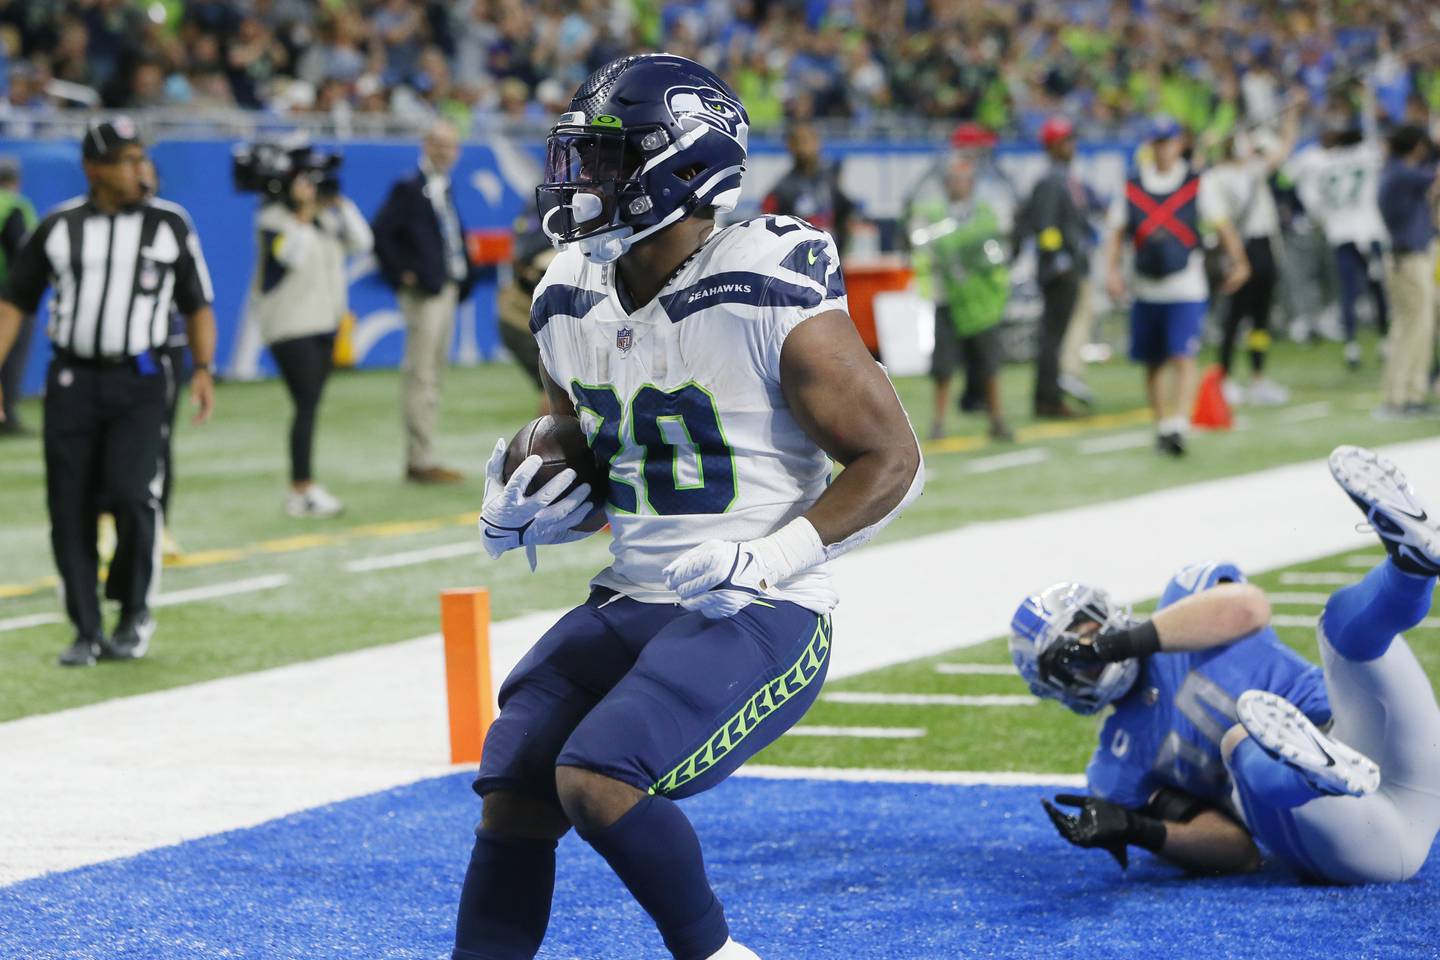 Seahawks running back Rashaad Penny scores on a 36-yard run during the second half against the Lions on Sunday, Oct. 2, 2022, in Detroit.